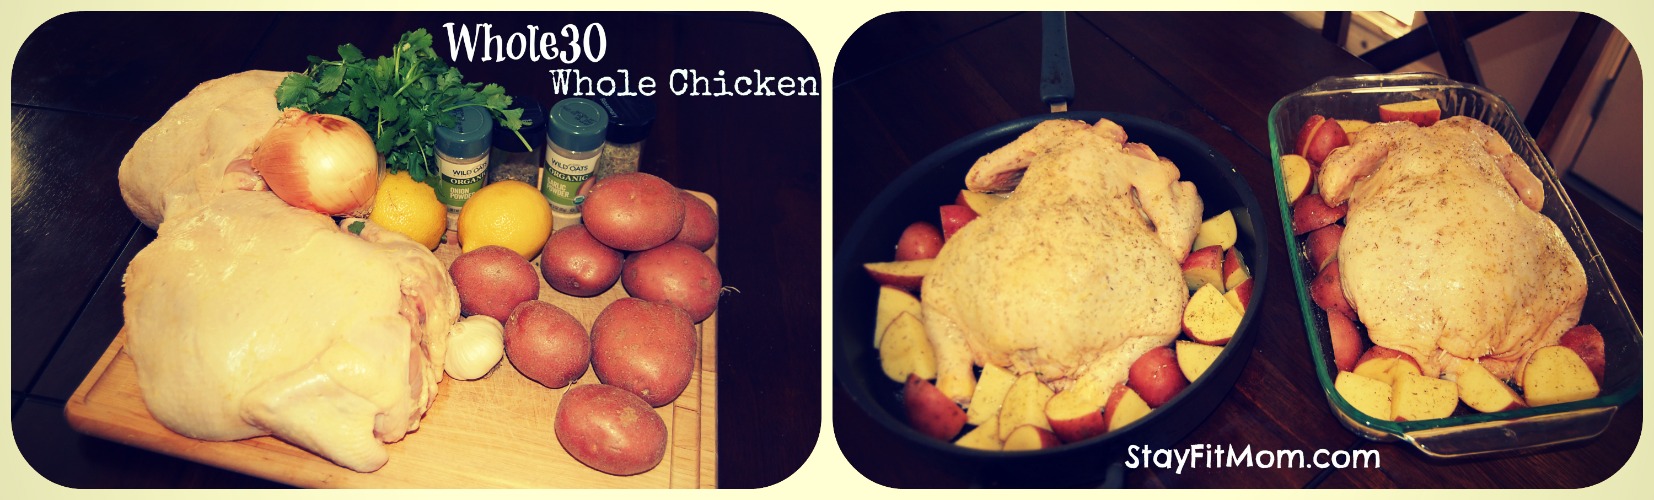 I made a whole chicken about once a week during whole30. Lots of leftovers and VERY affordable!